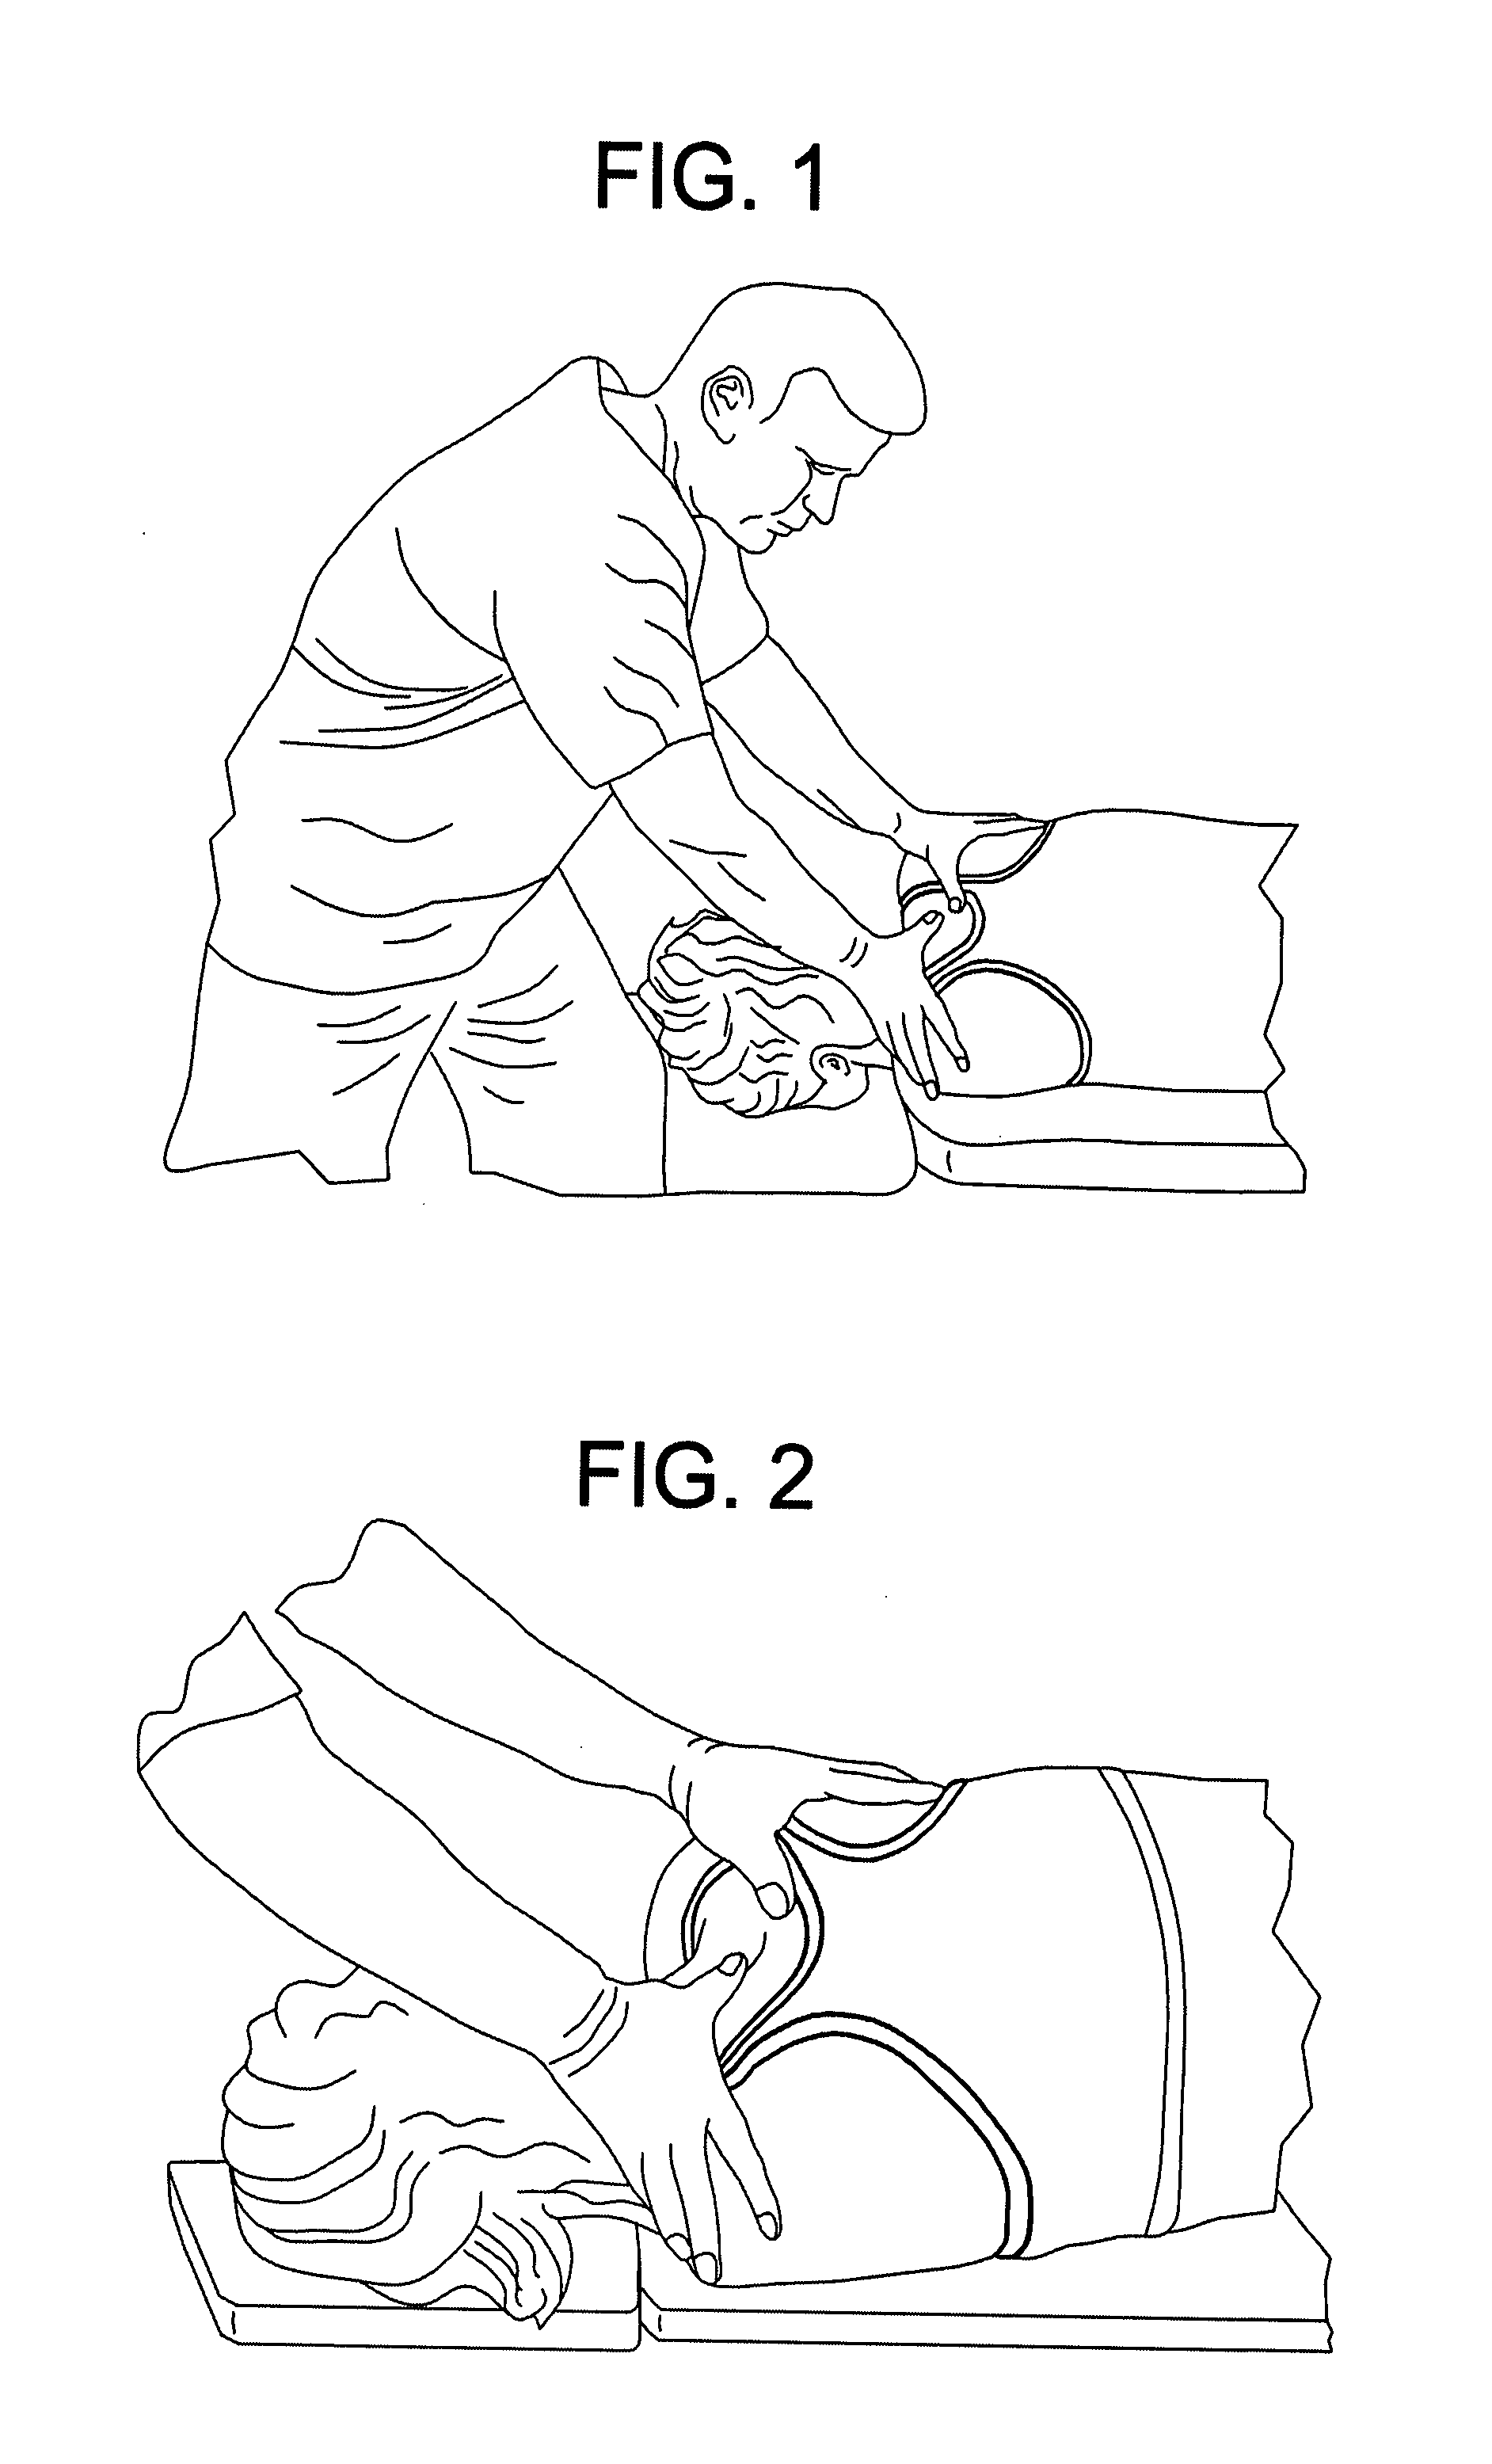 System and methods for stress release and associated nitric oxide release for treatment of pain in specific parts of the body